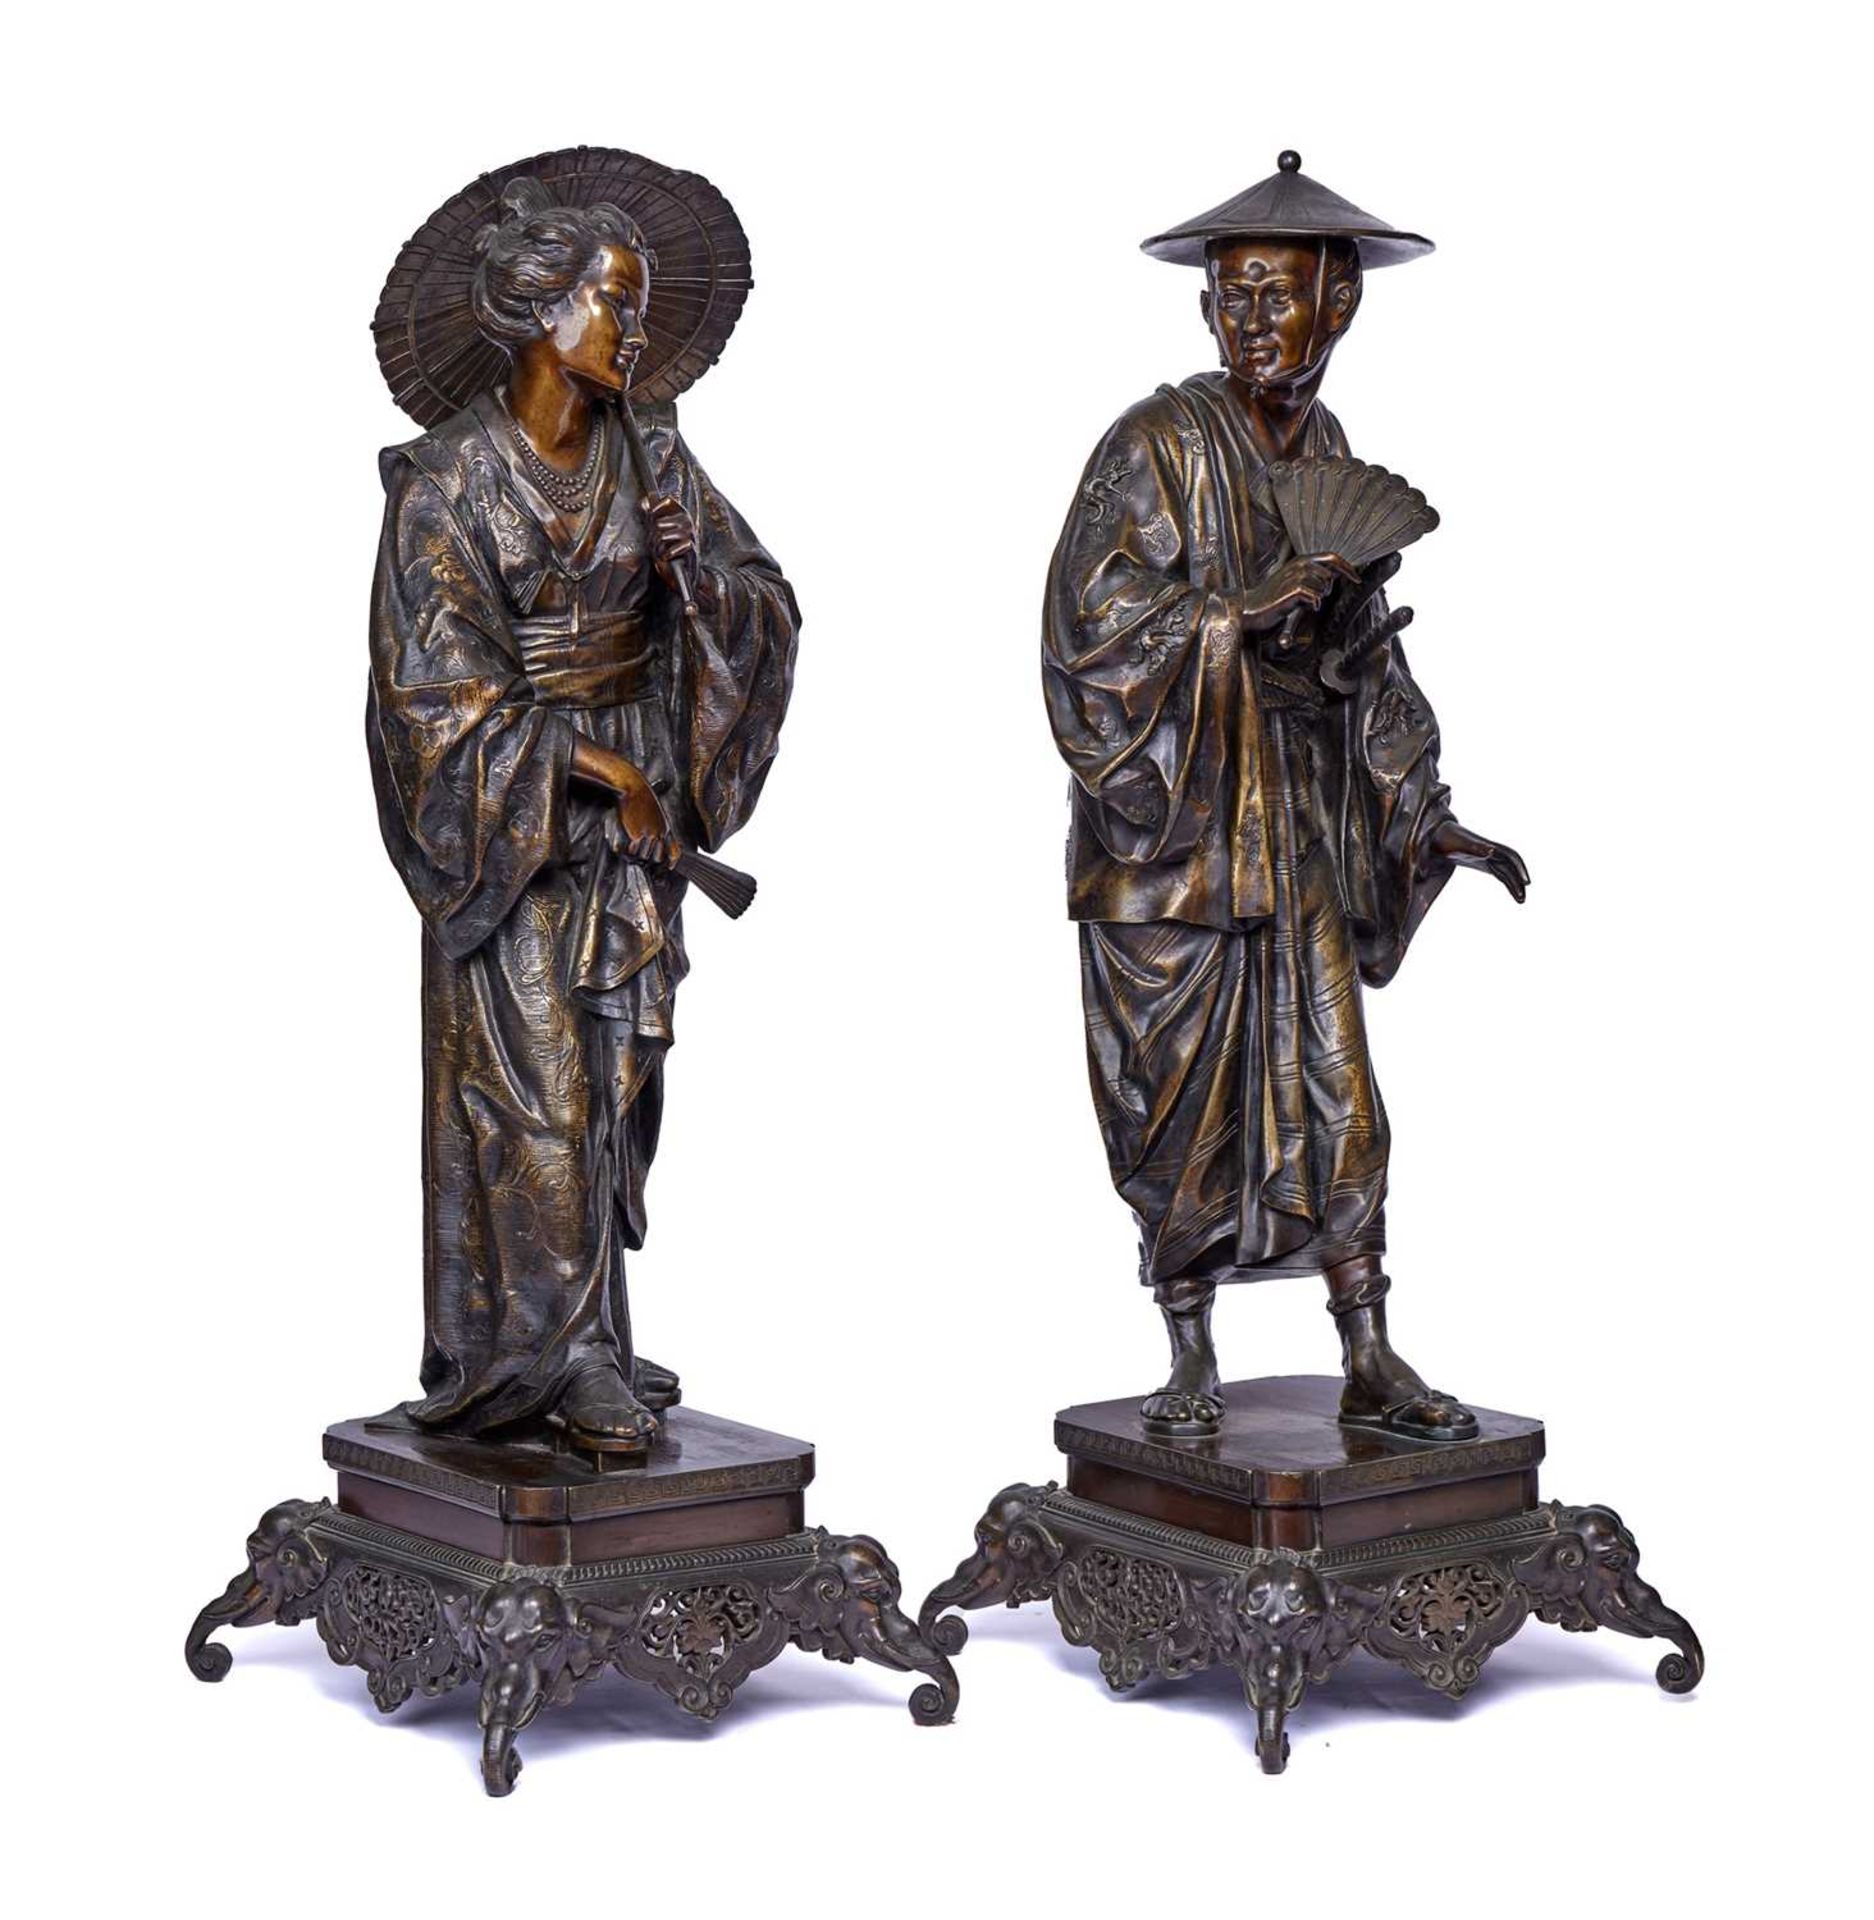 A FINE PAIR OF 19TH CENTURY FRENCH BRONZE 'JAPONISME' FIGURES - Image 2 of 4